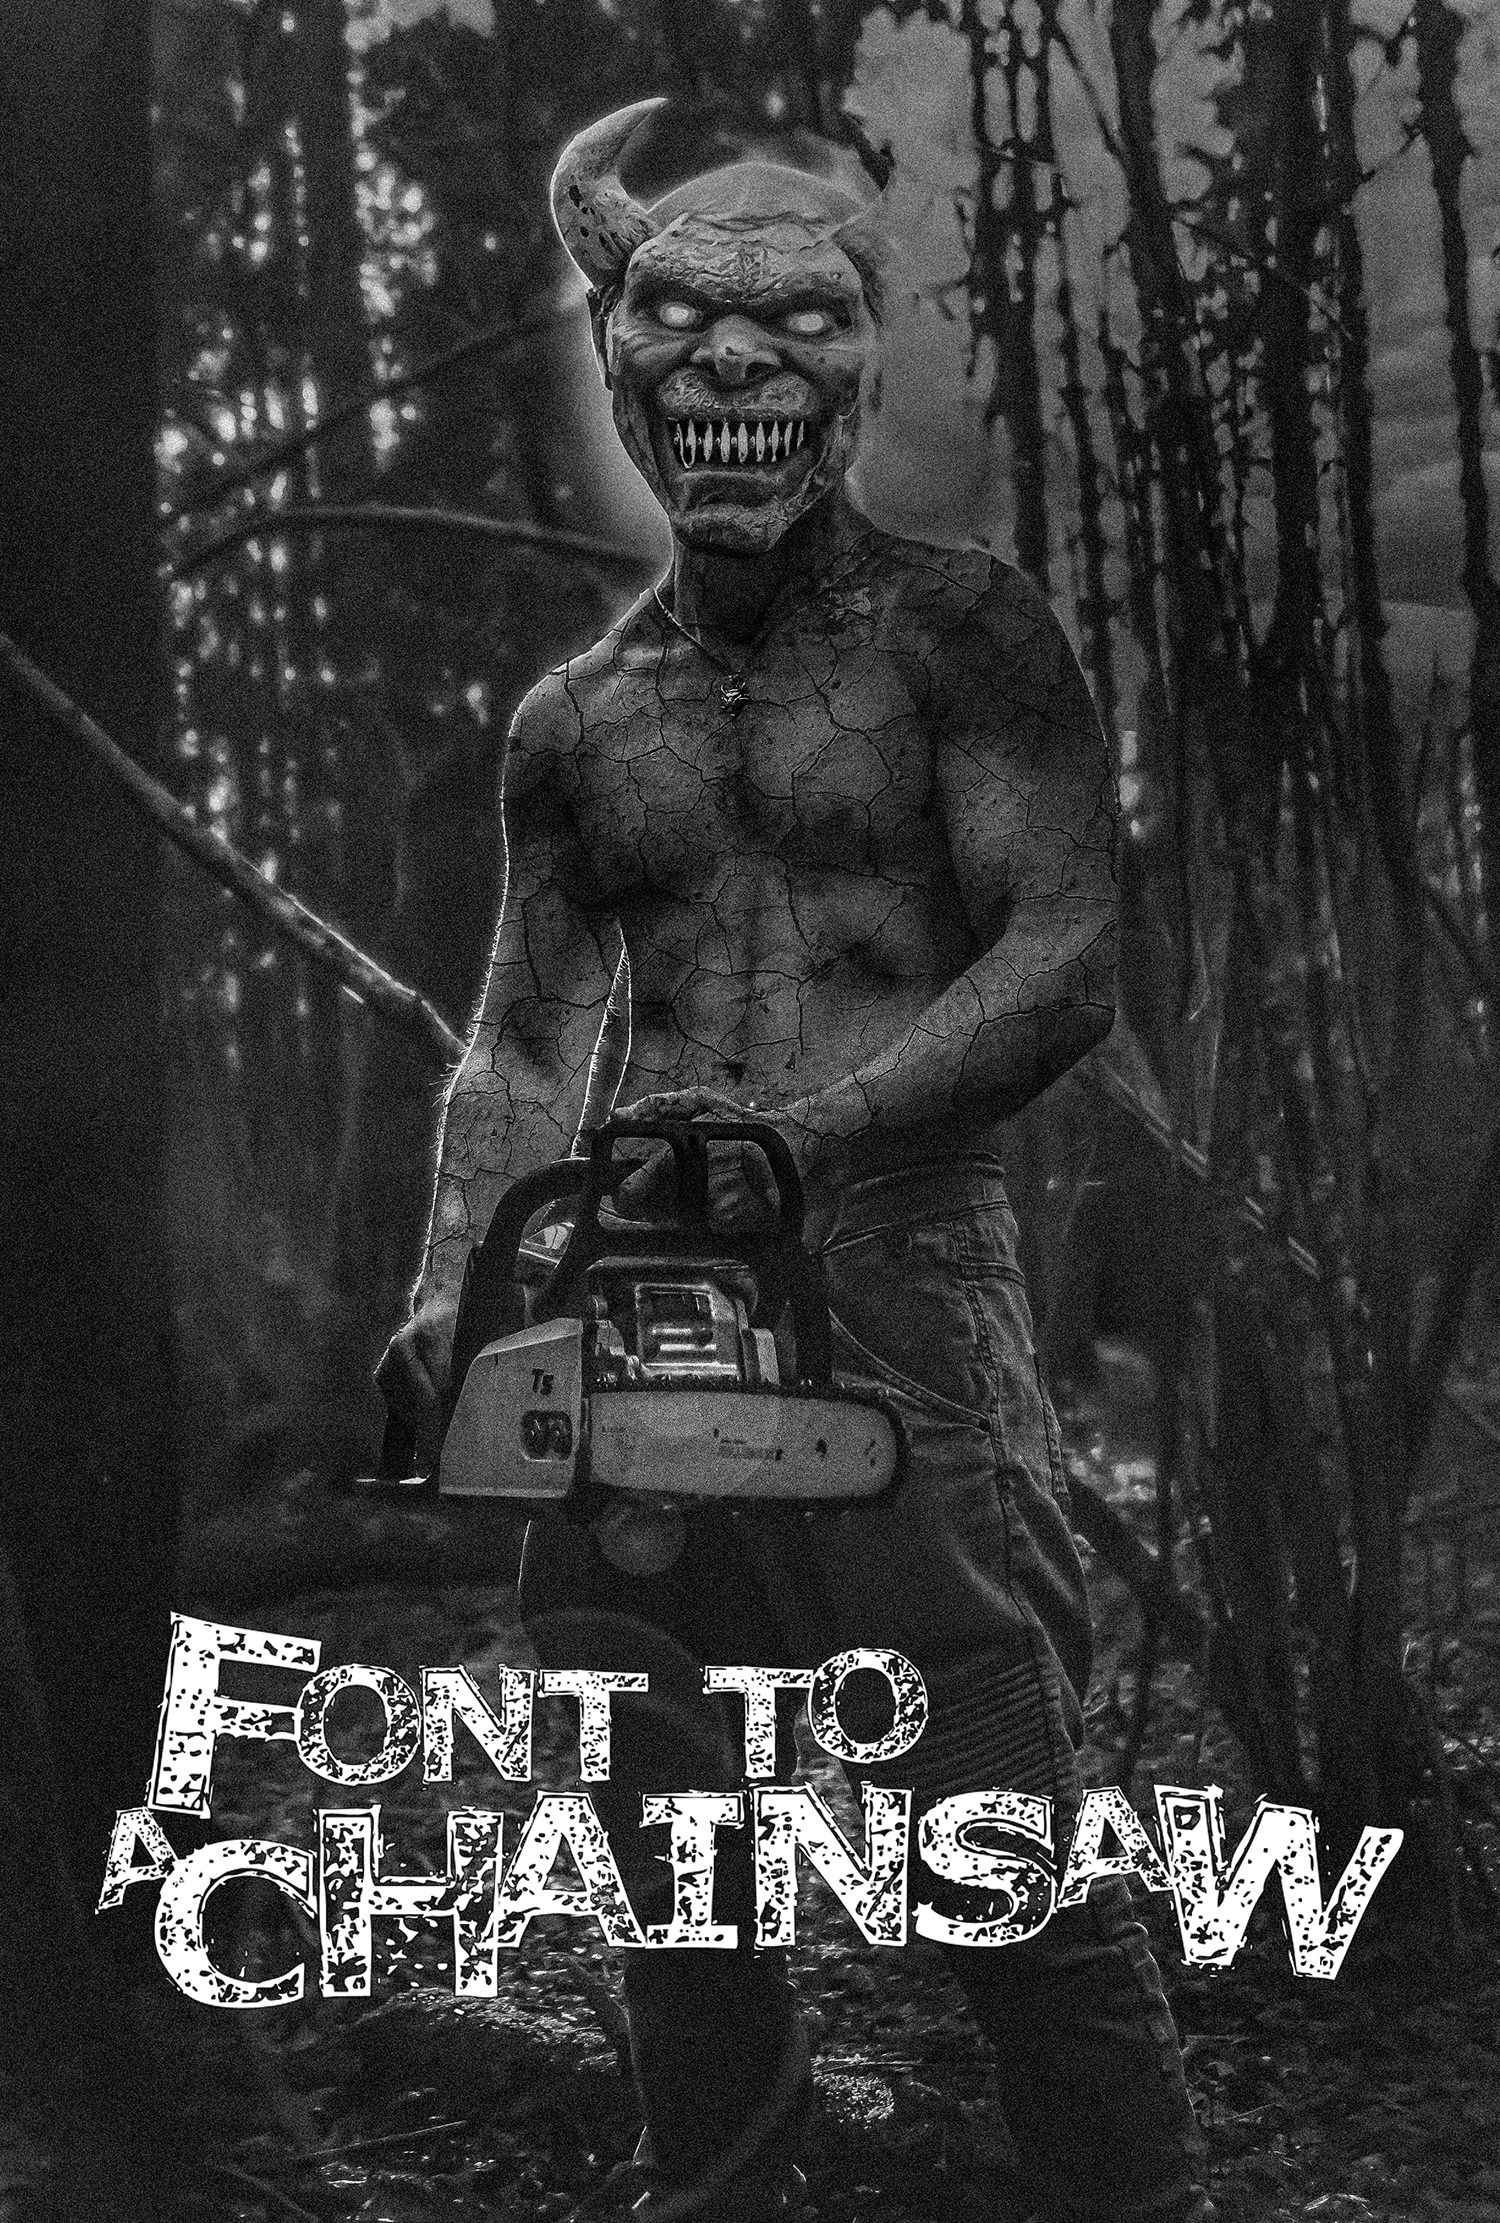 Font to a Chainsaw, an extra bold, black, highly eroded and destroyed font.